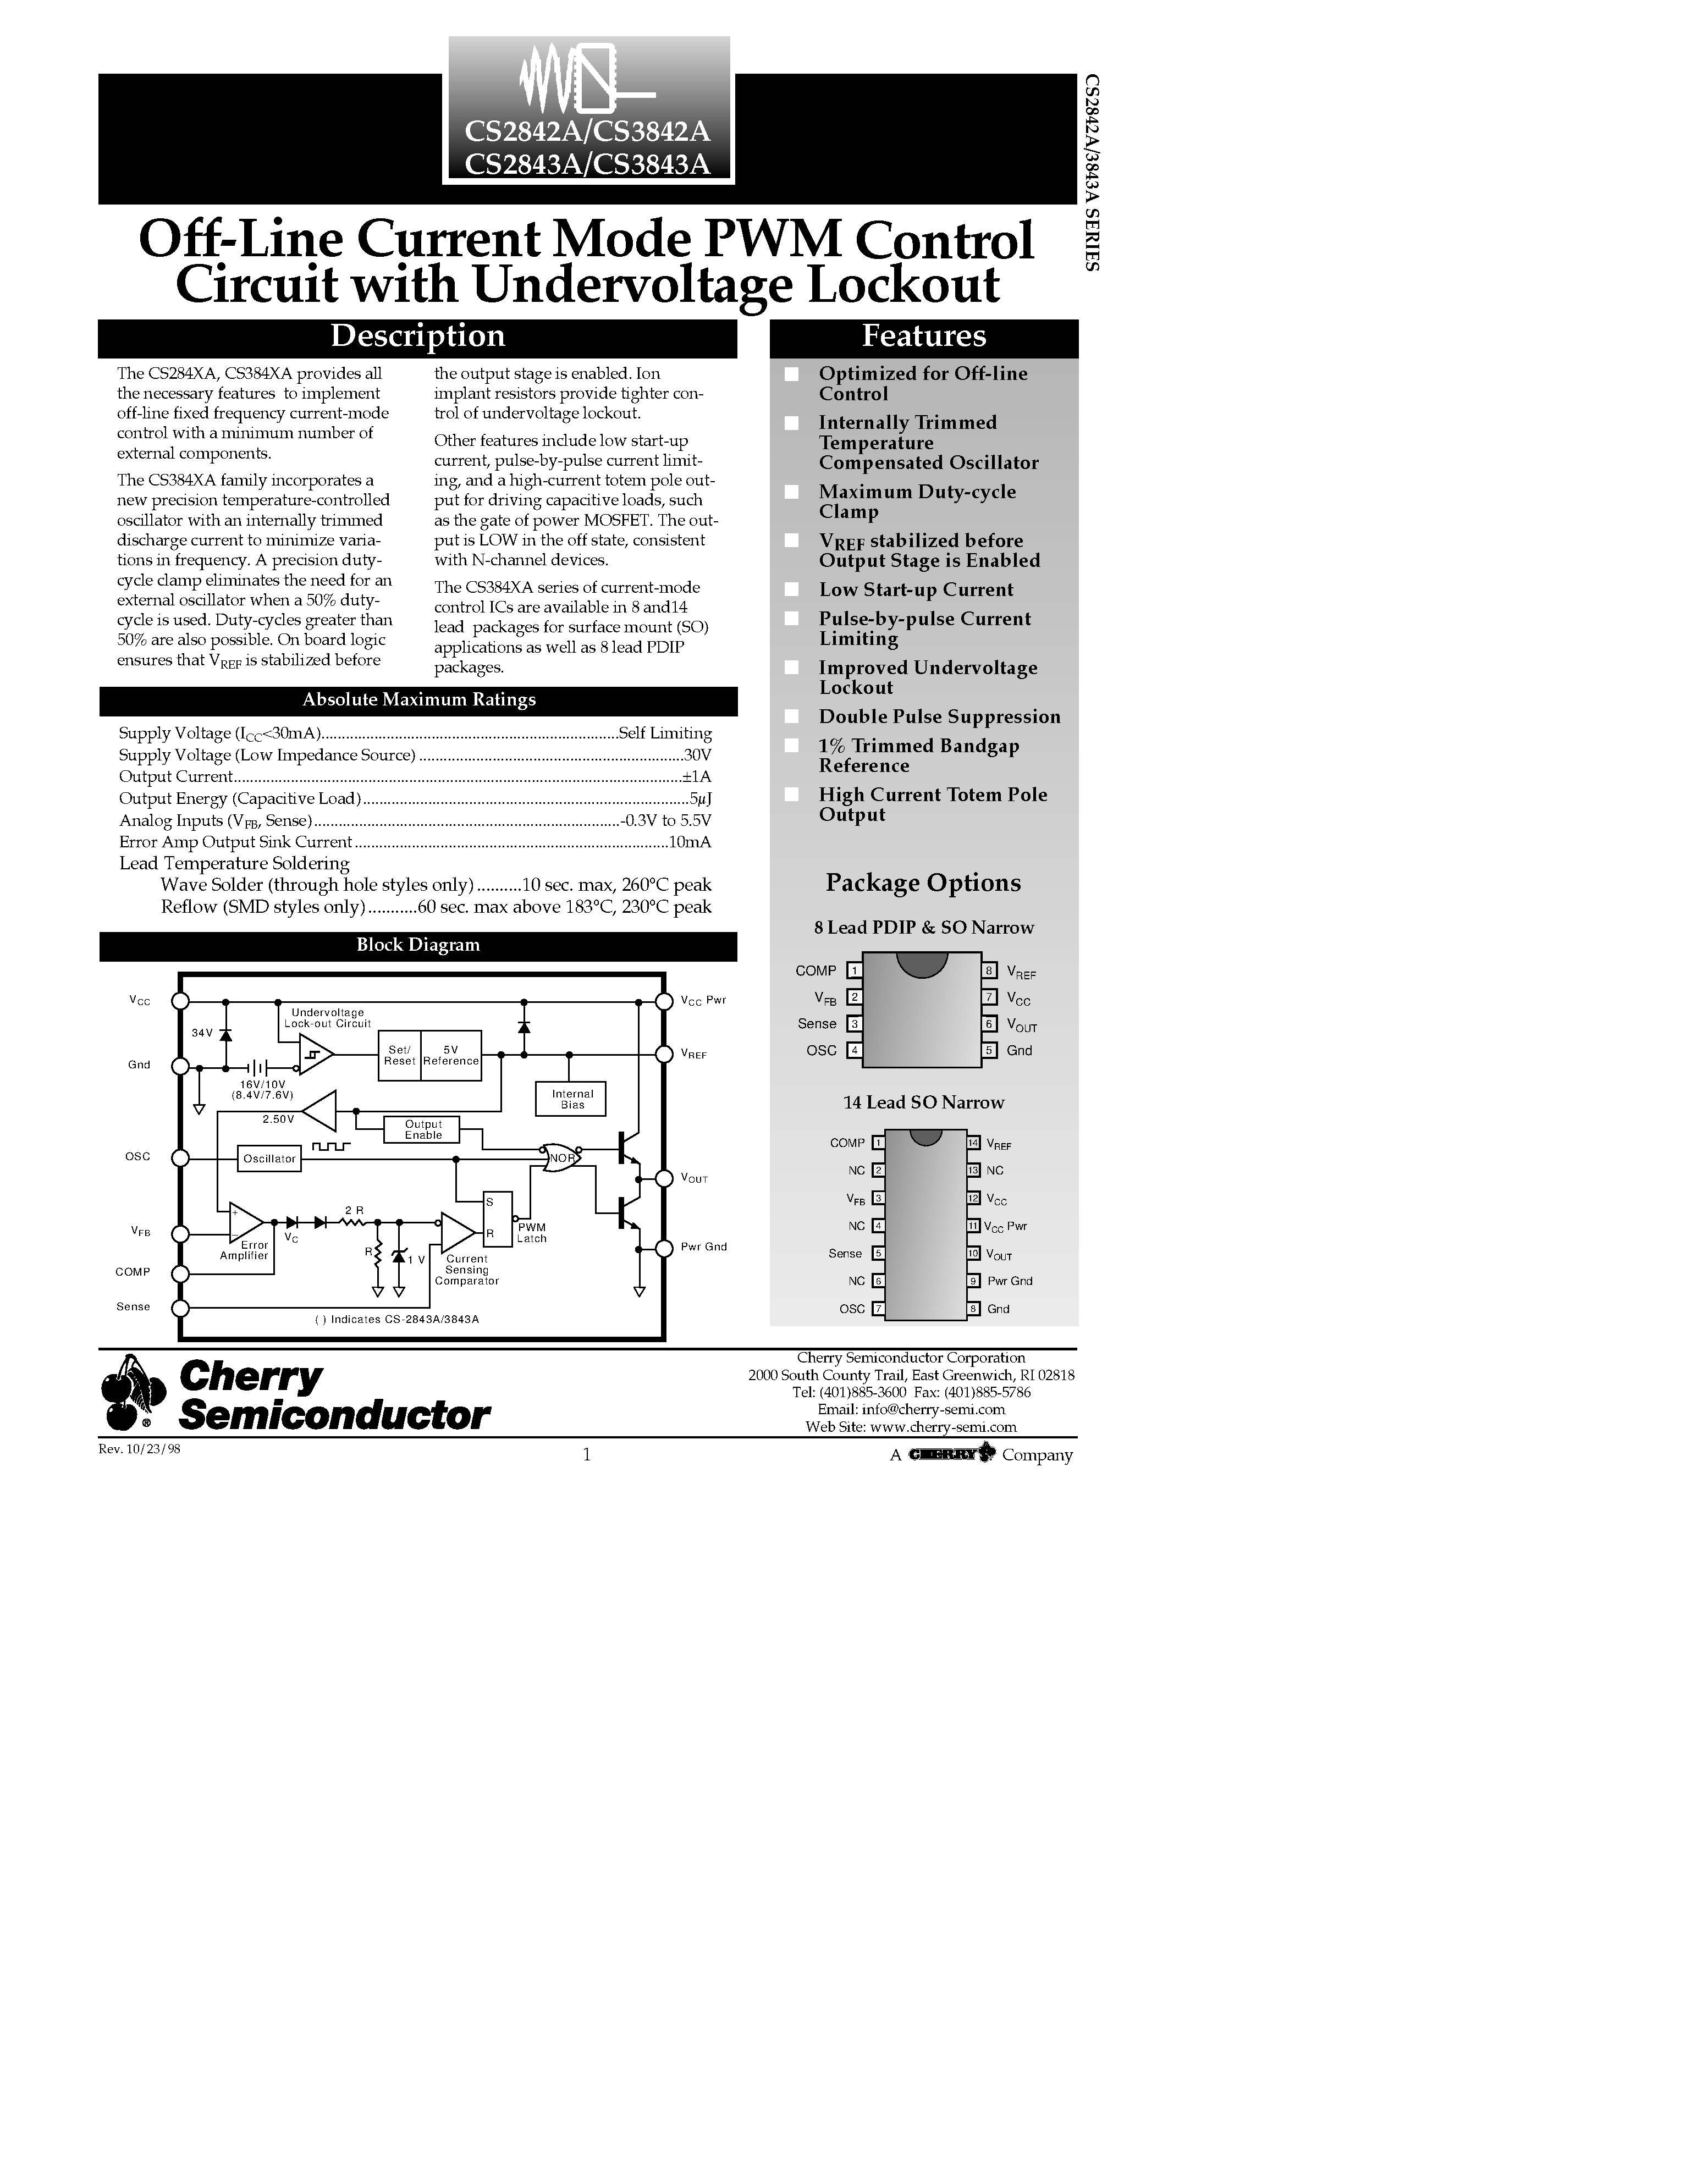 Datasheet CS2842A - Off-Line Current Mode PWM Control Circuit with Undervoltage Lockout page 1